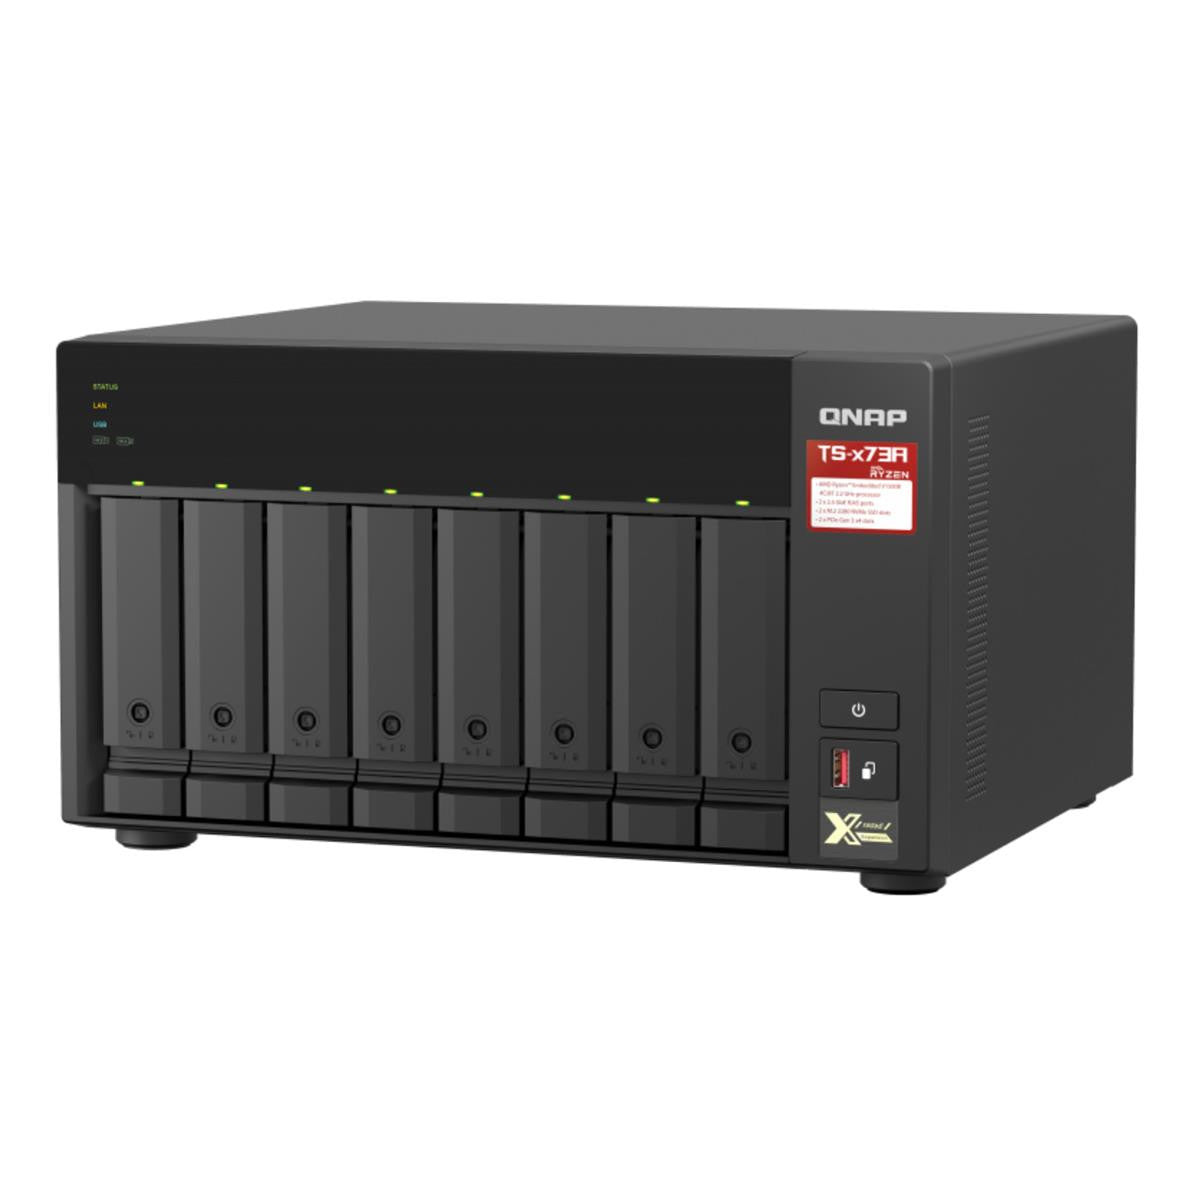 QNAP TS-873A 8-BAY NAS with 64GB DDR4 RAM and 48TB (8x6TB) Western Digital RED PLUS Drives Fully Assembled and Tested